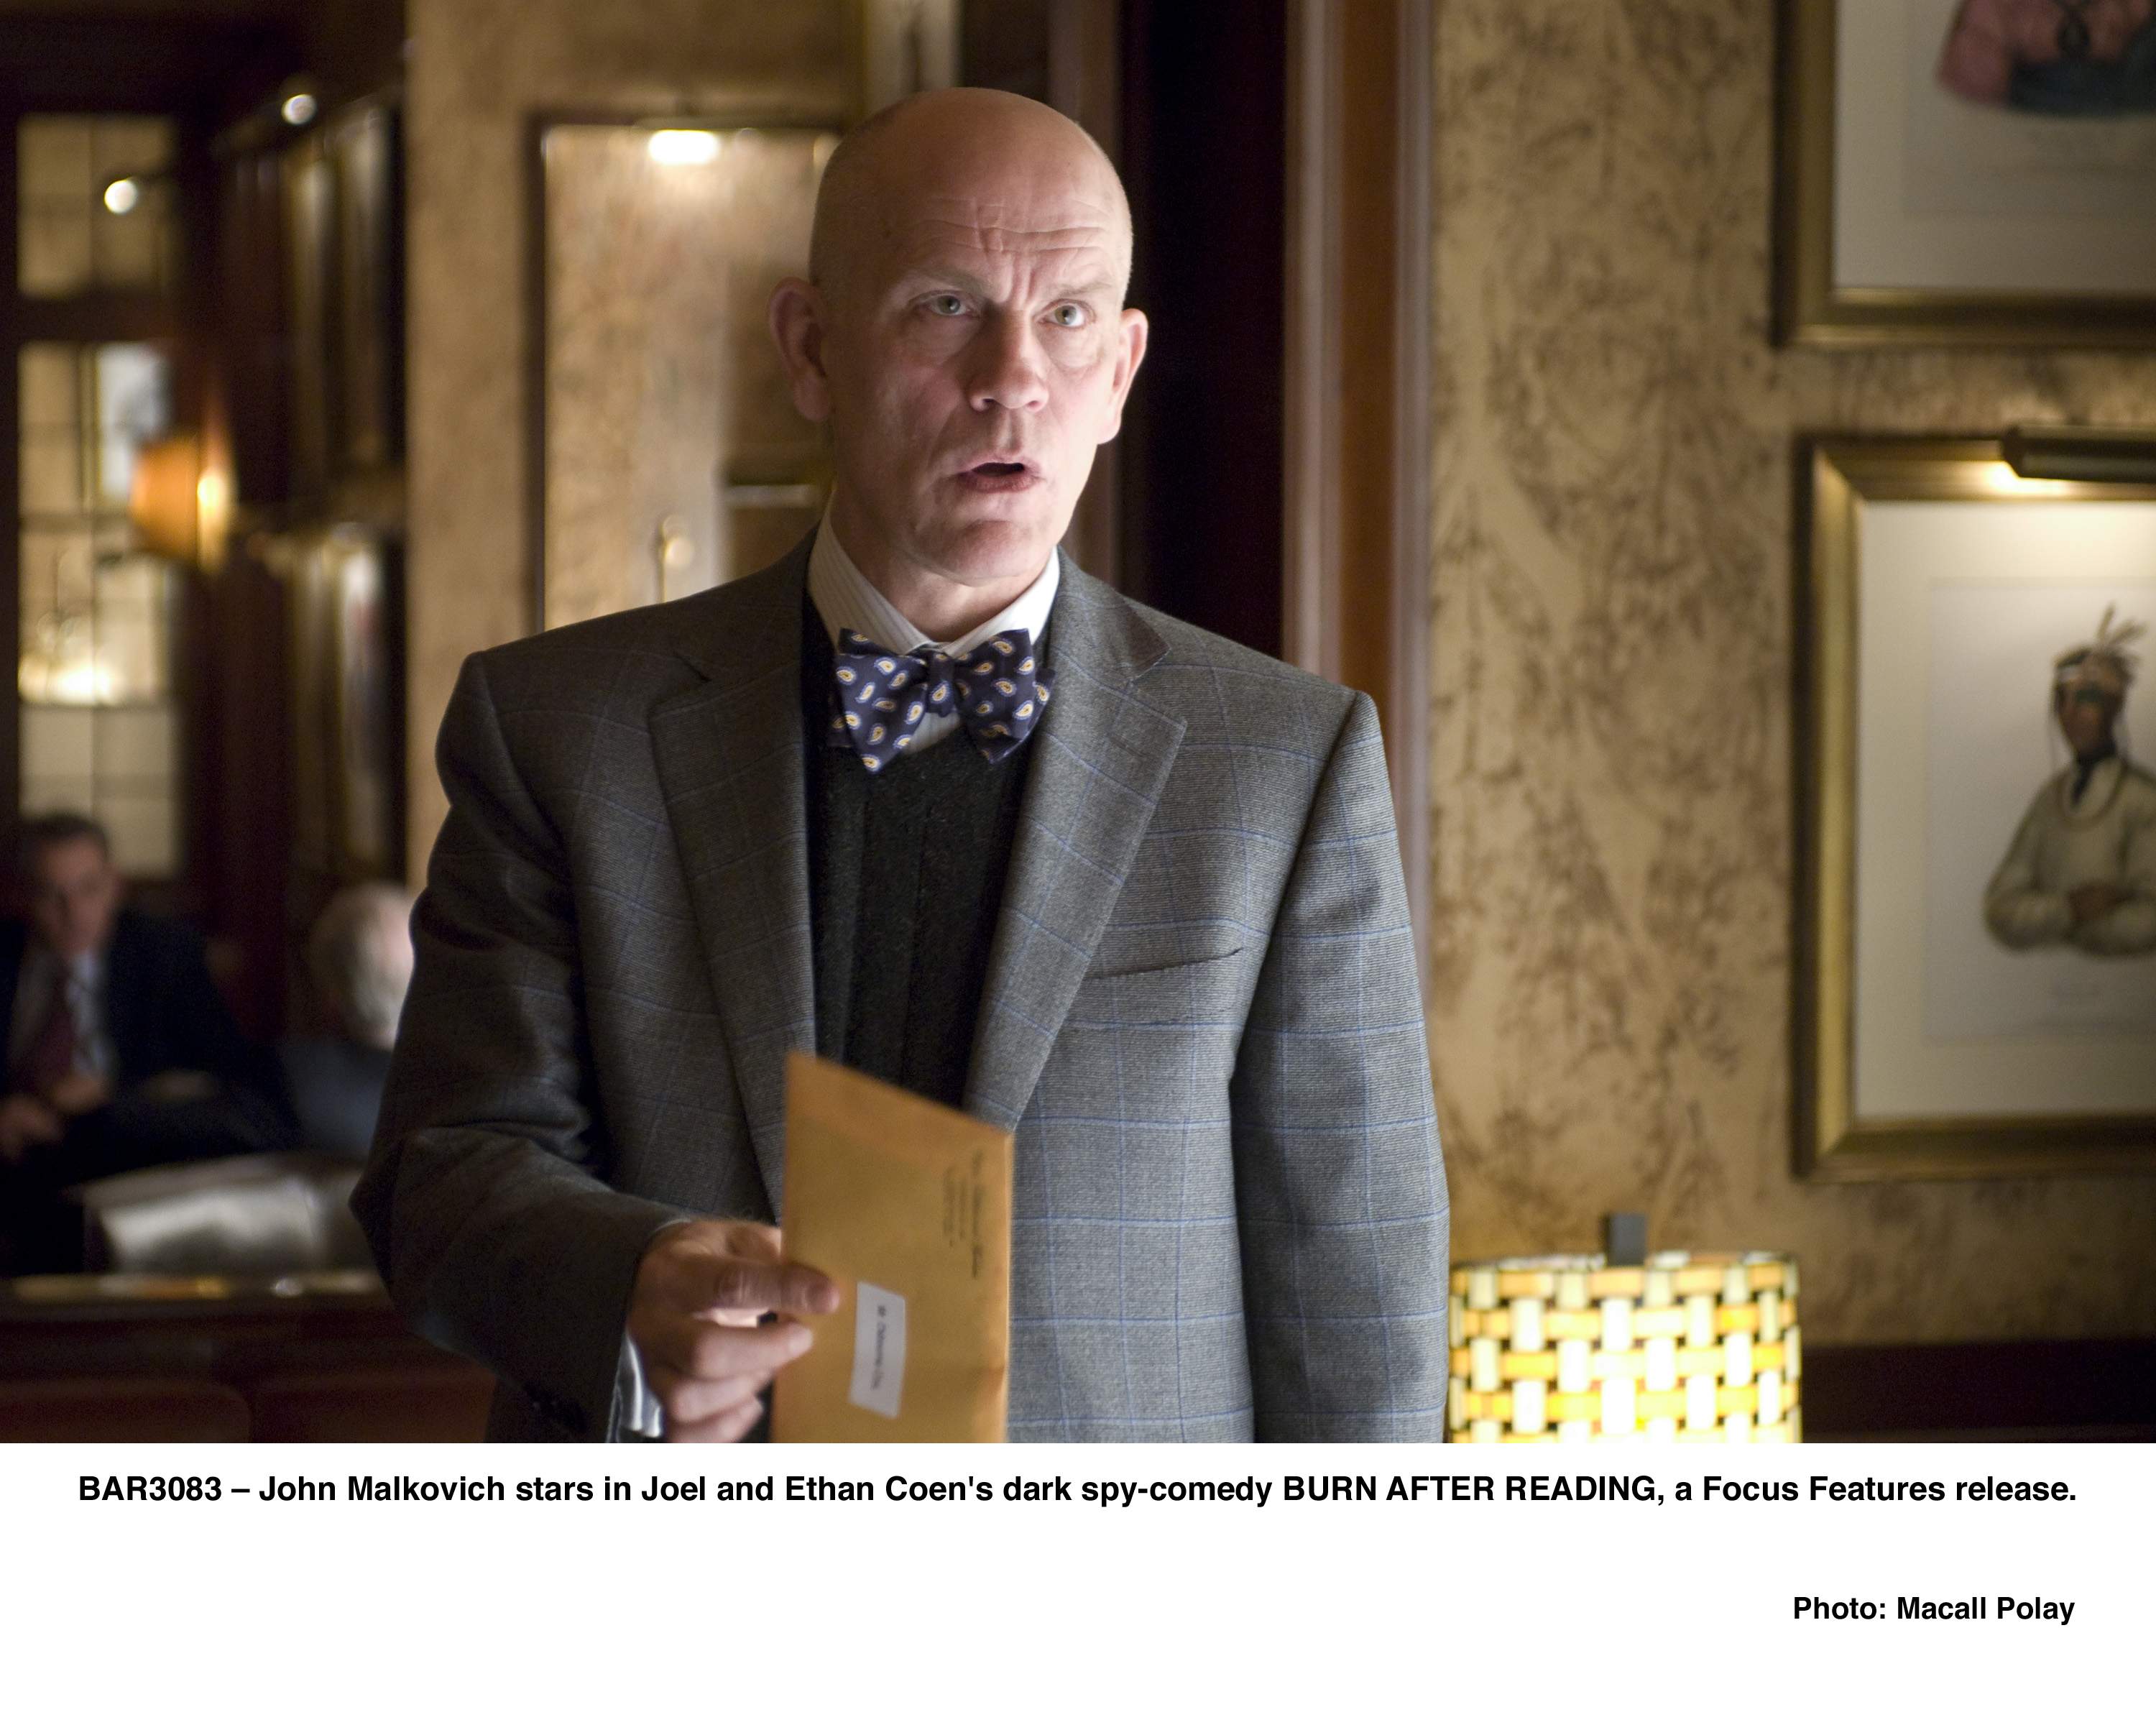 John Malkovich stars in Joel and Ethan Coen's dark spy-comedy BURN AFTER READING, a Focus Features release.